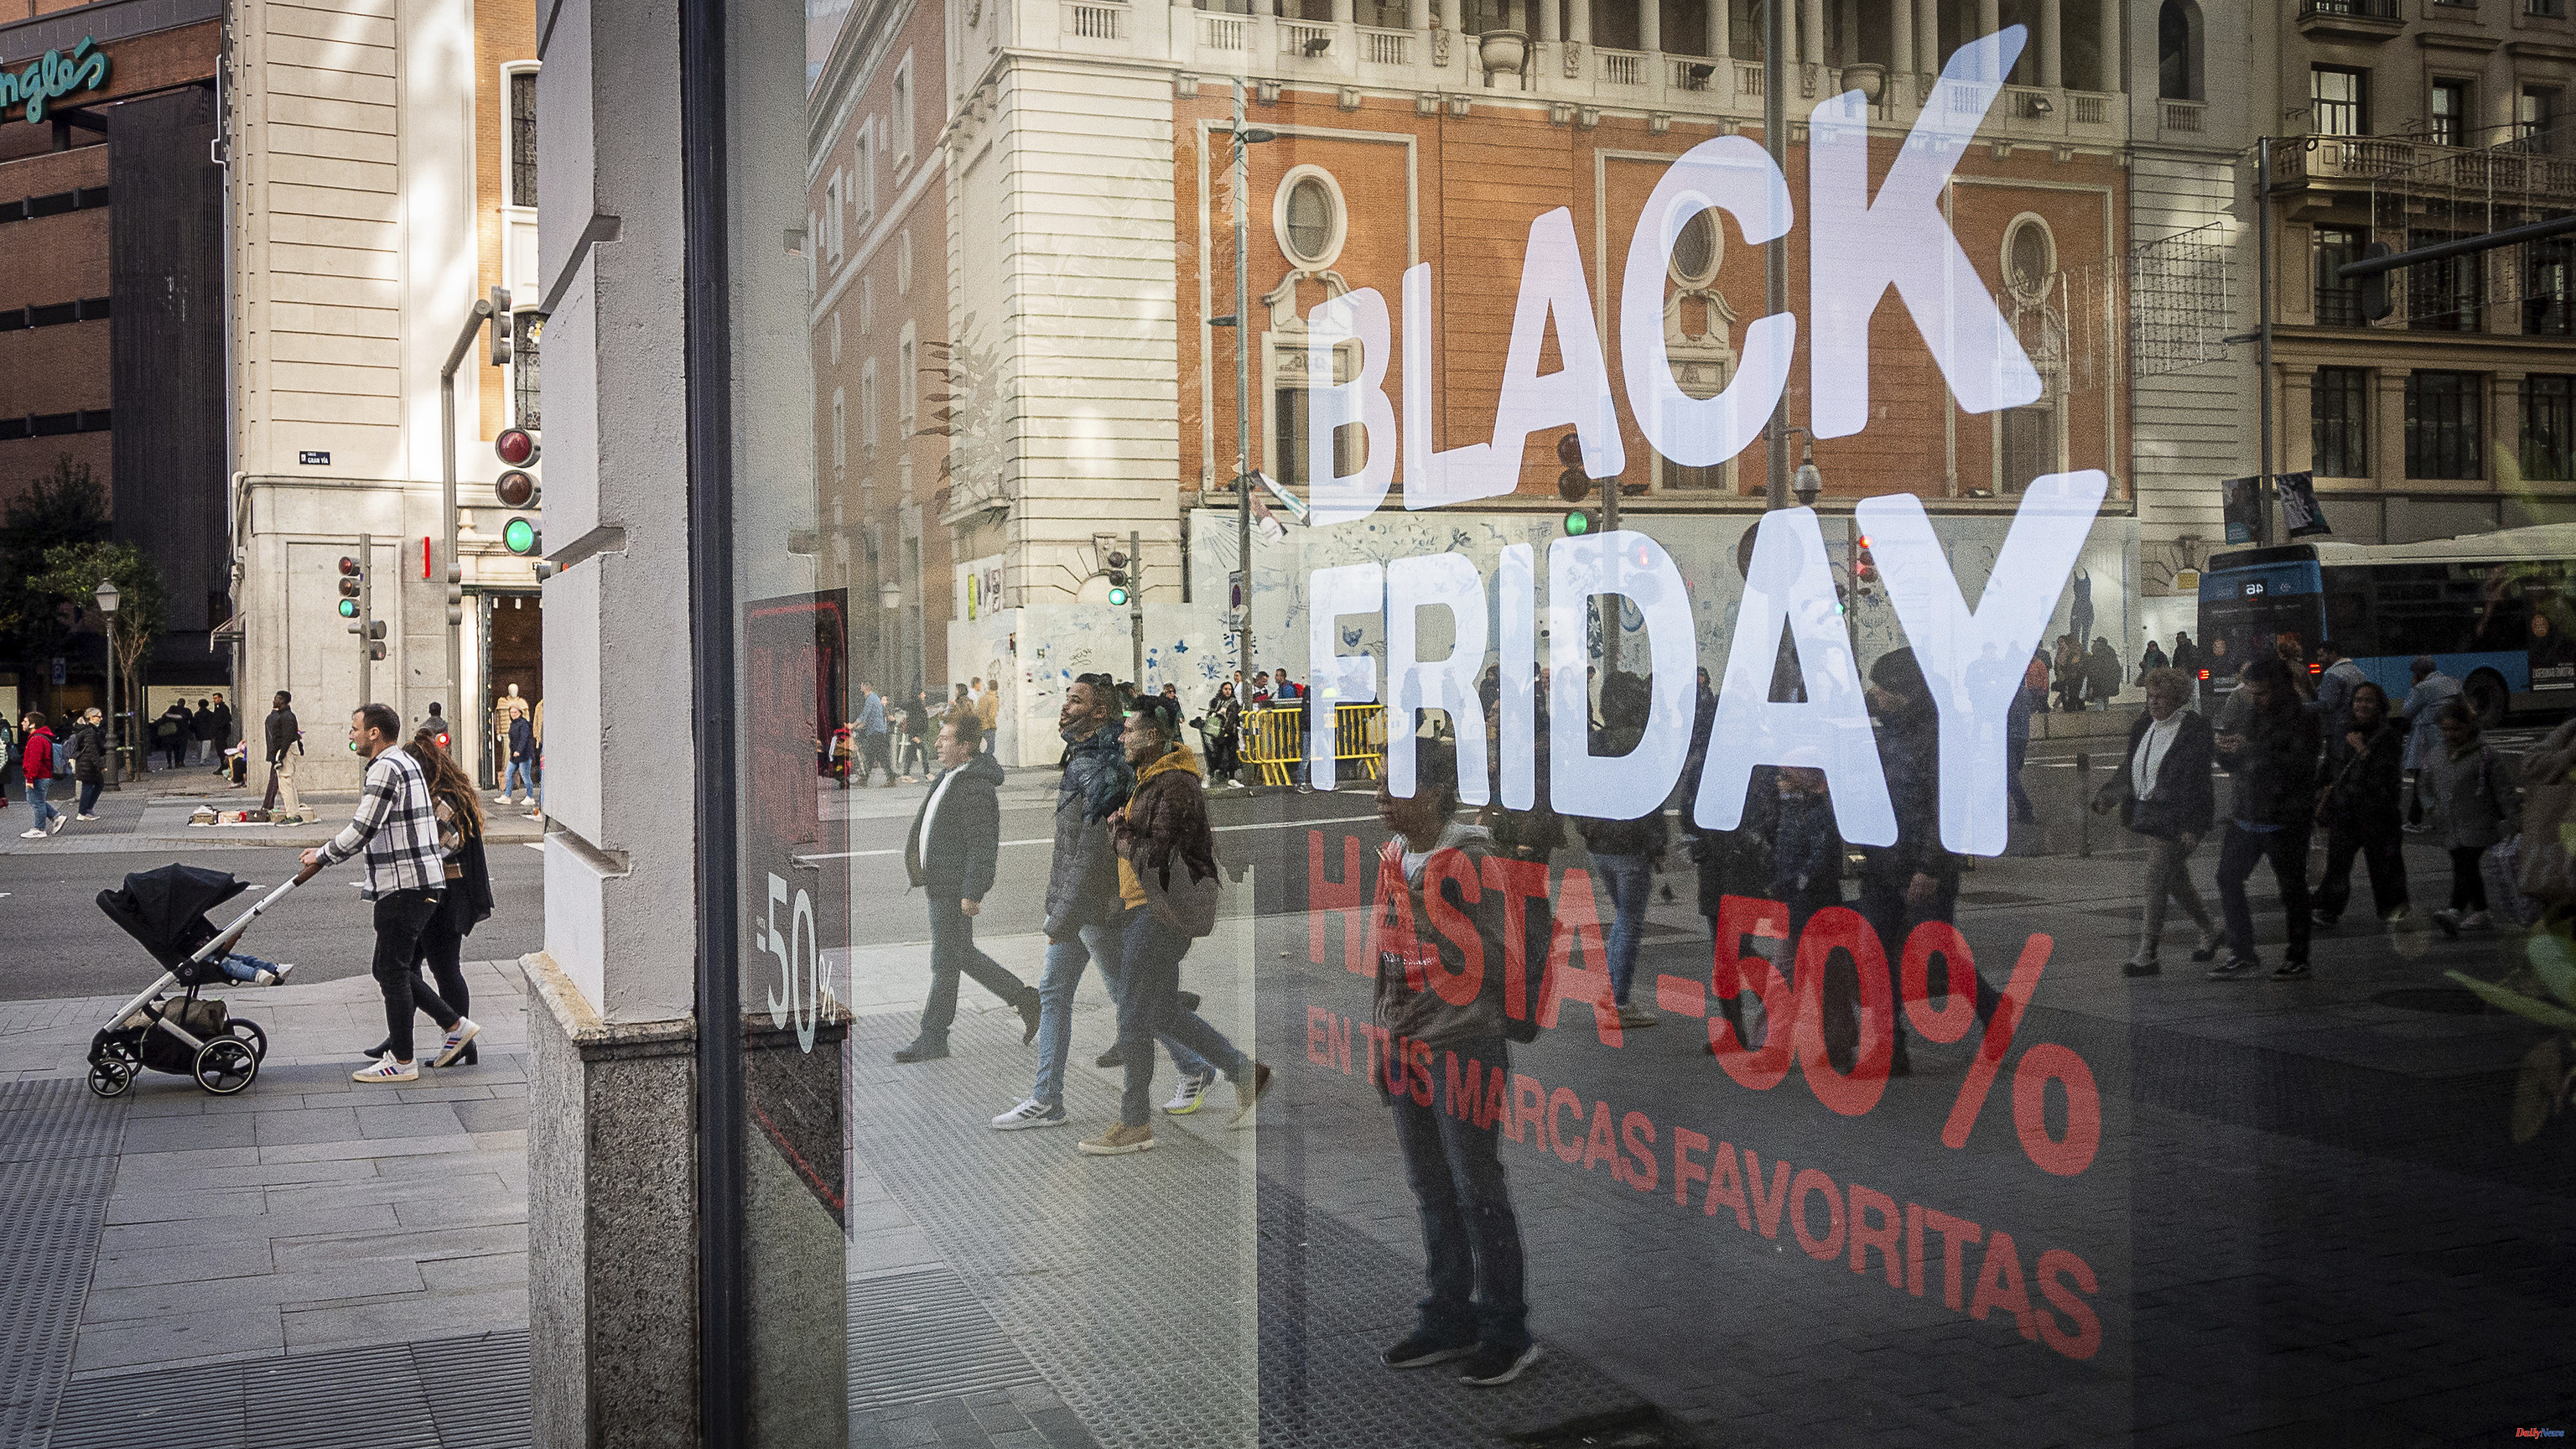 Consumption 84% of Spaniards will make purchases during Black Friday